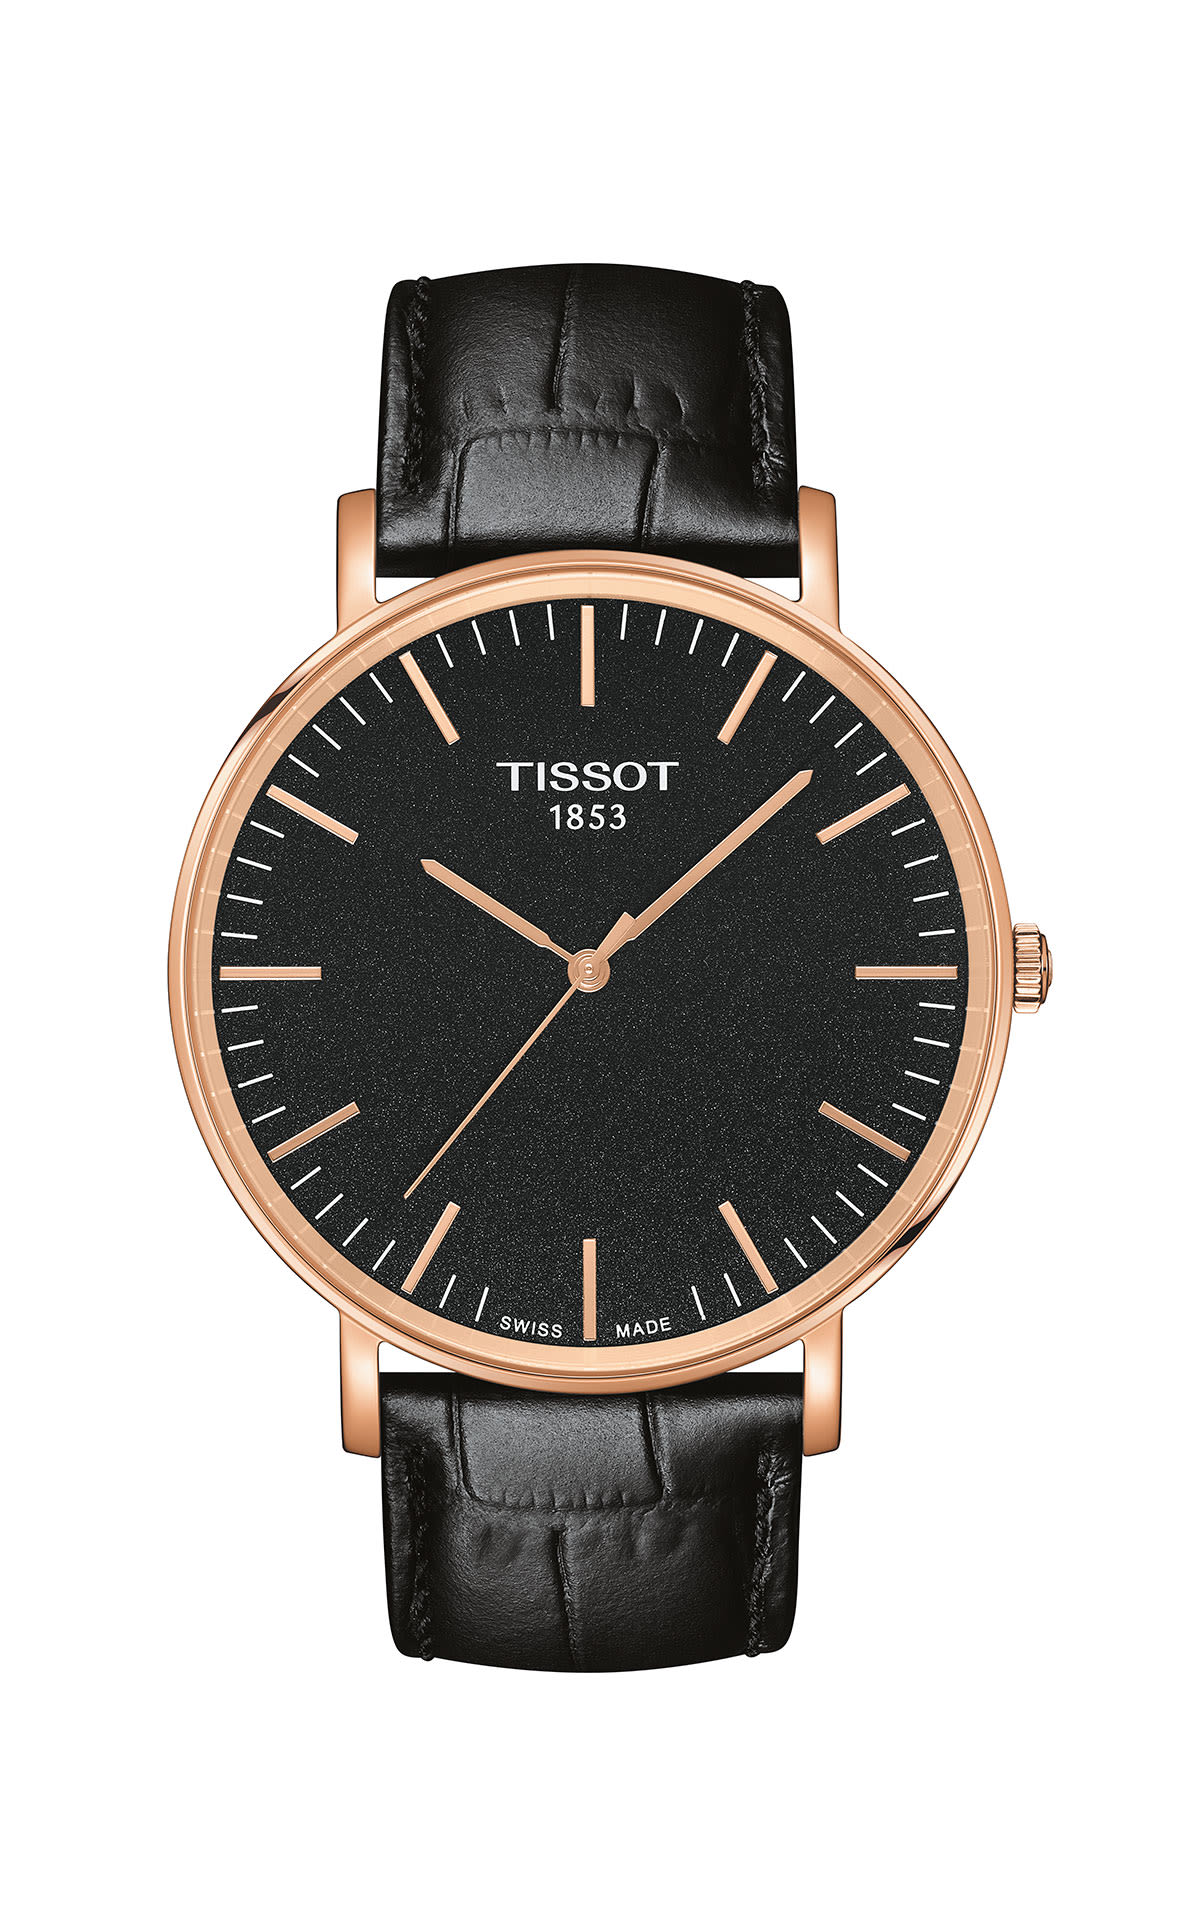 Tissot gold watch with black strap